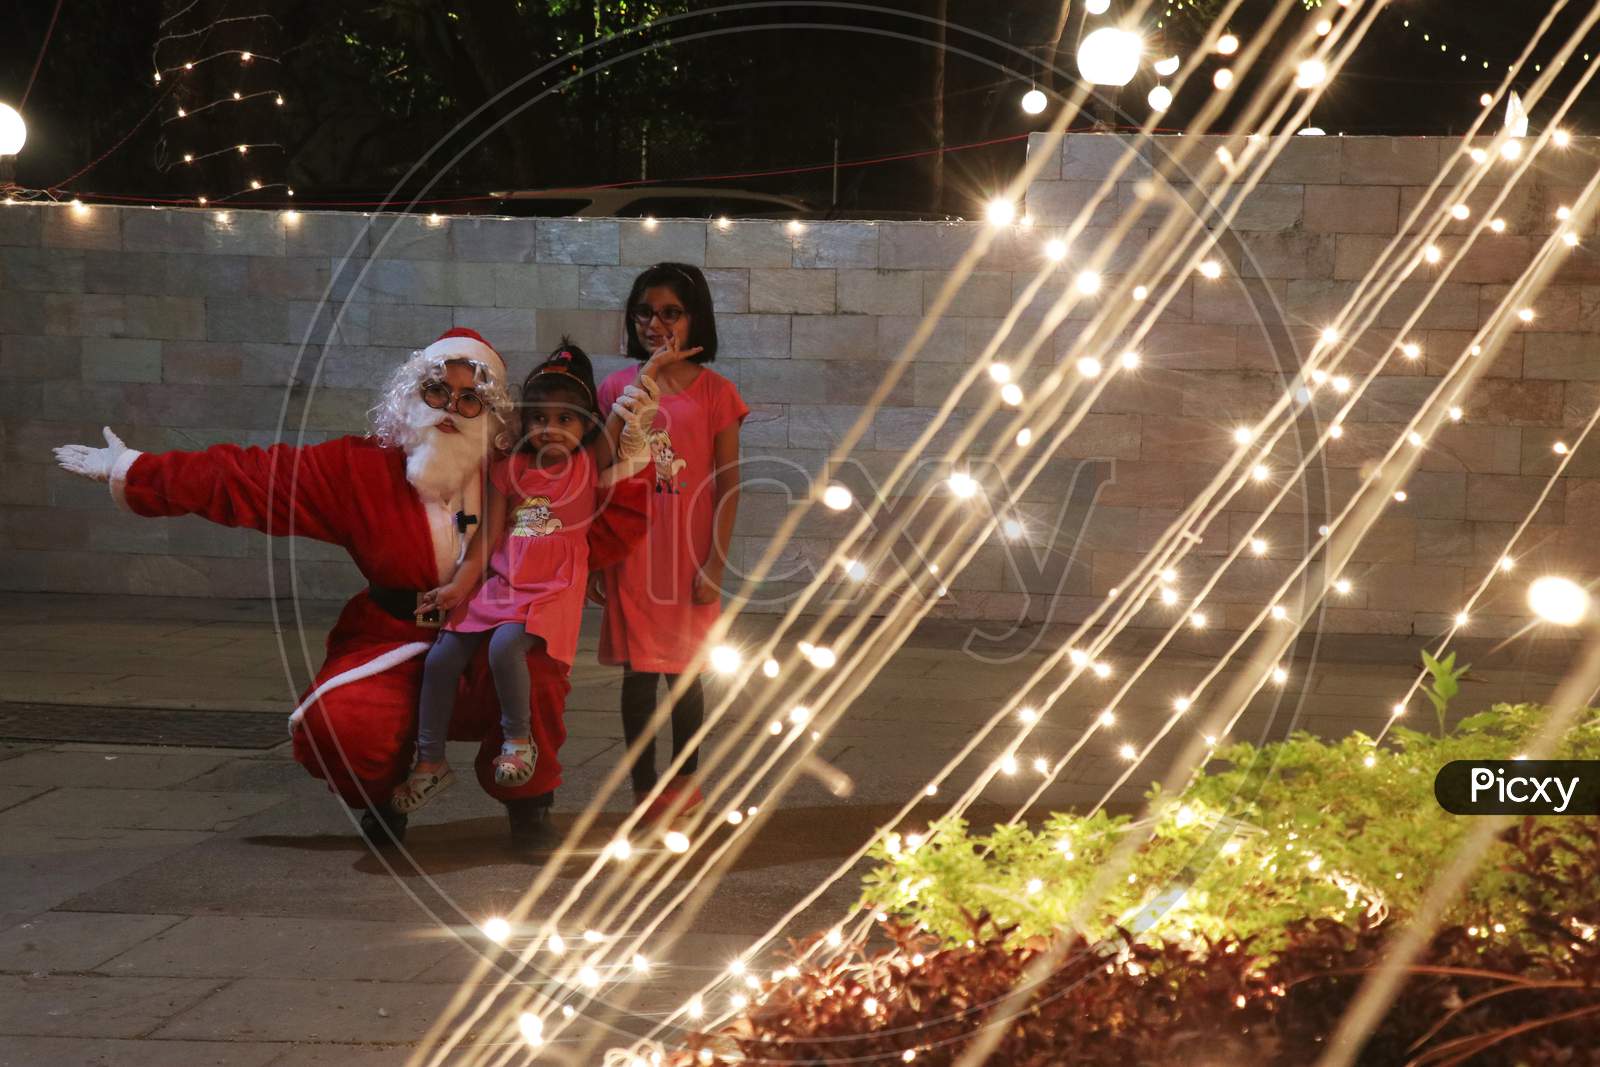 A woman dressed as Santa Claus poses for a picture with kids at a residential area on Christmas eve in Mumbai, India, December 24, 2020.